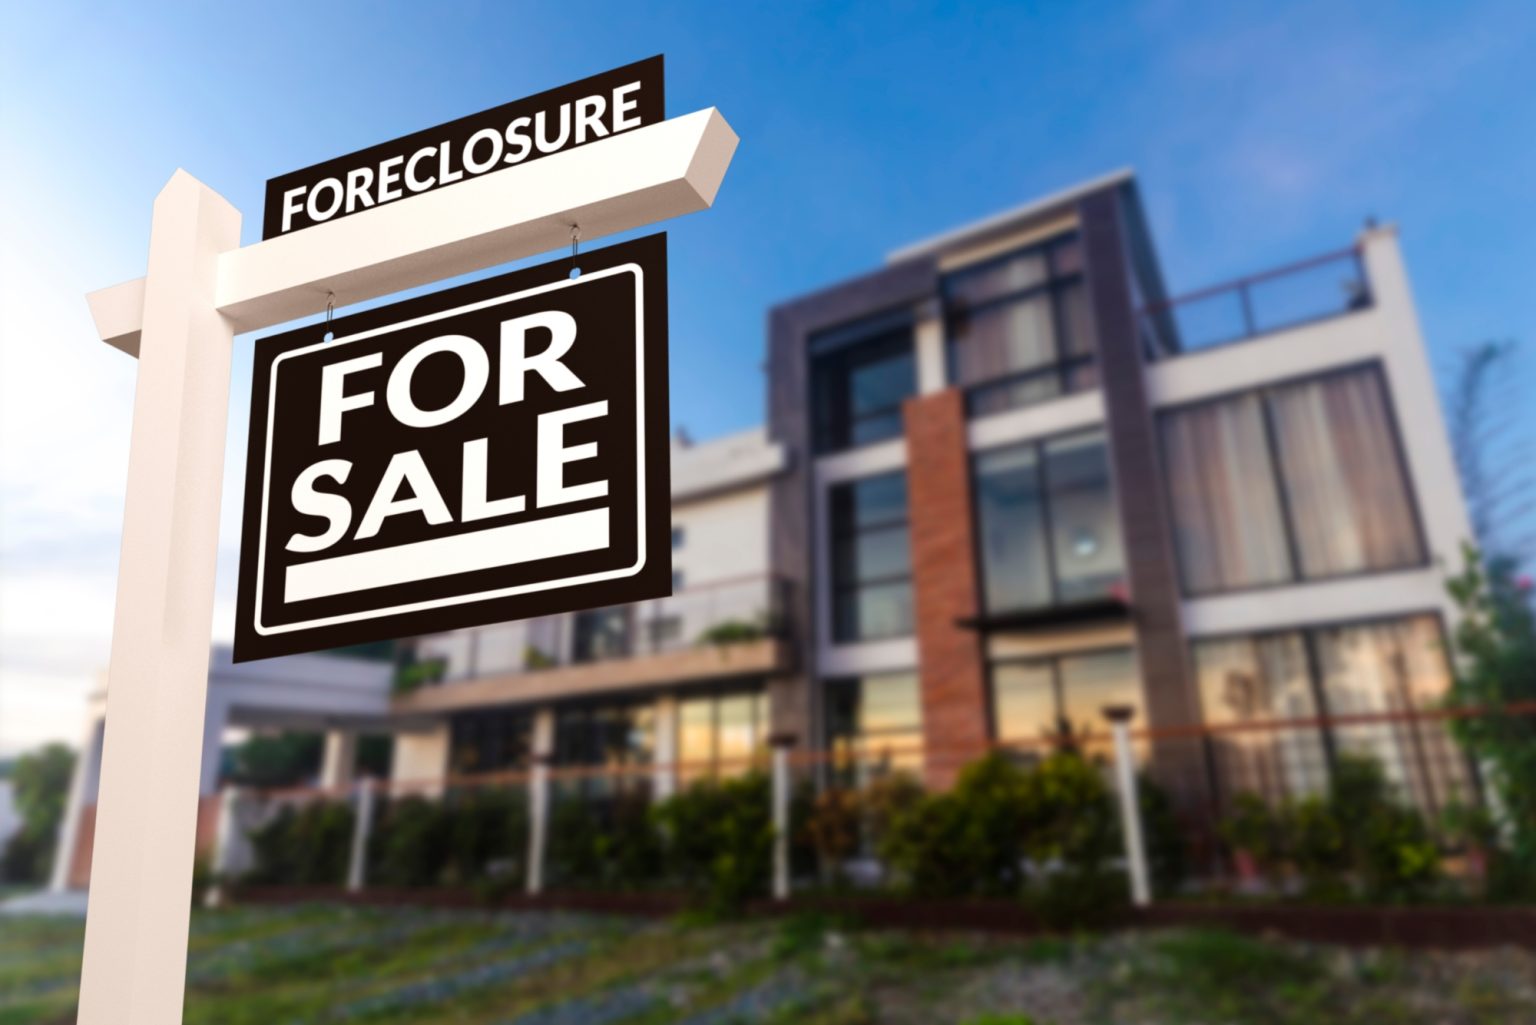 Avoiding Foreclosure on Your Home